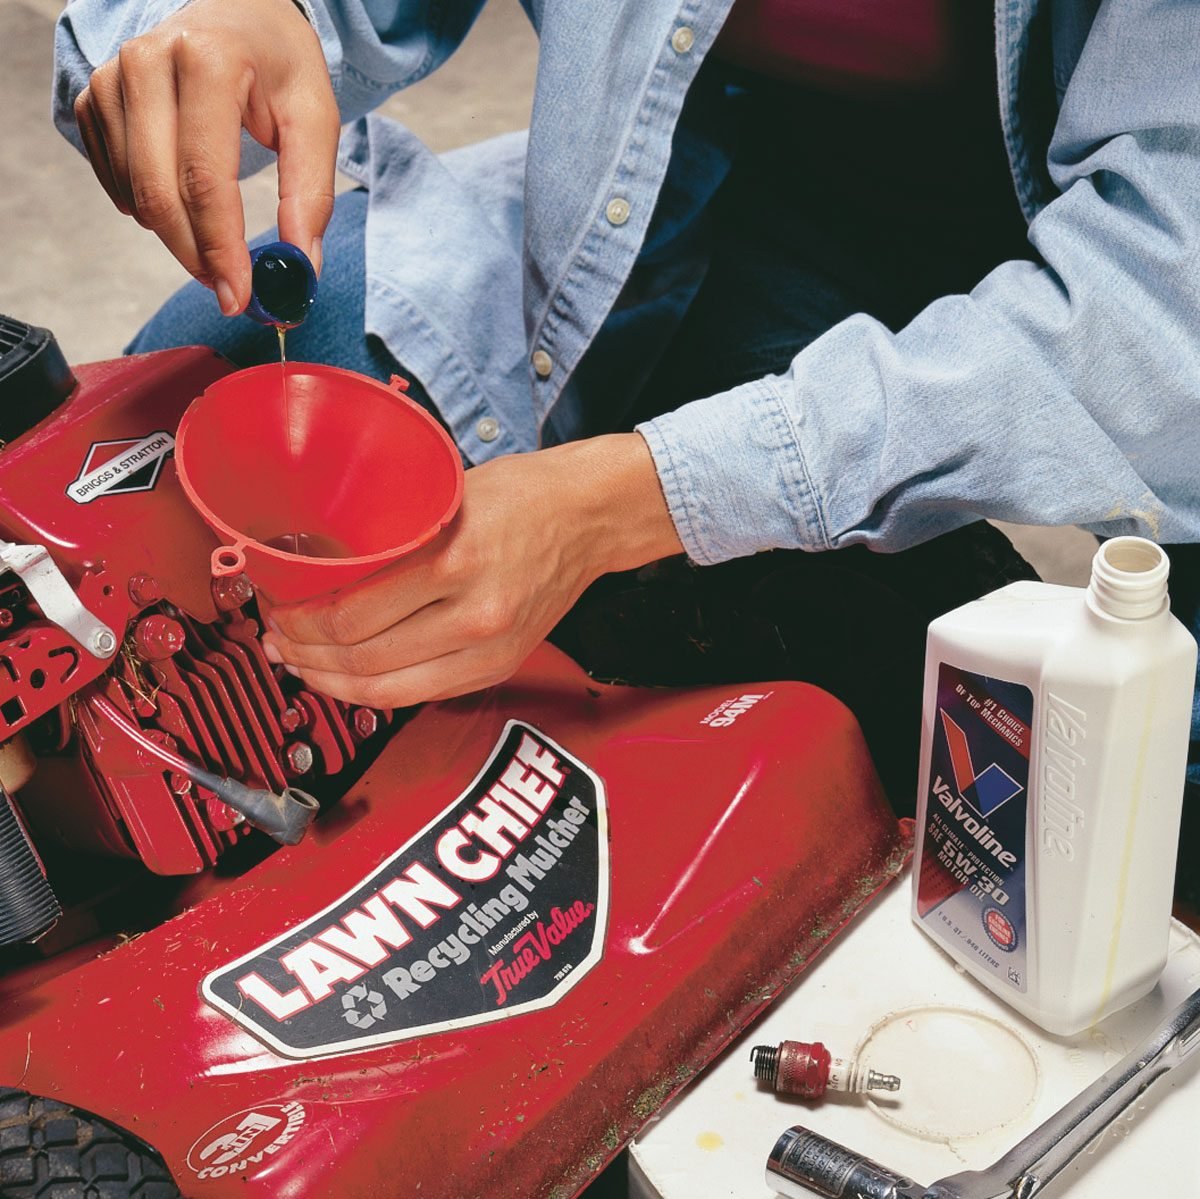 Clean Up Your Lawnmower and Other Yard Tools